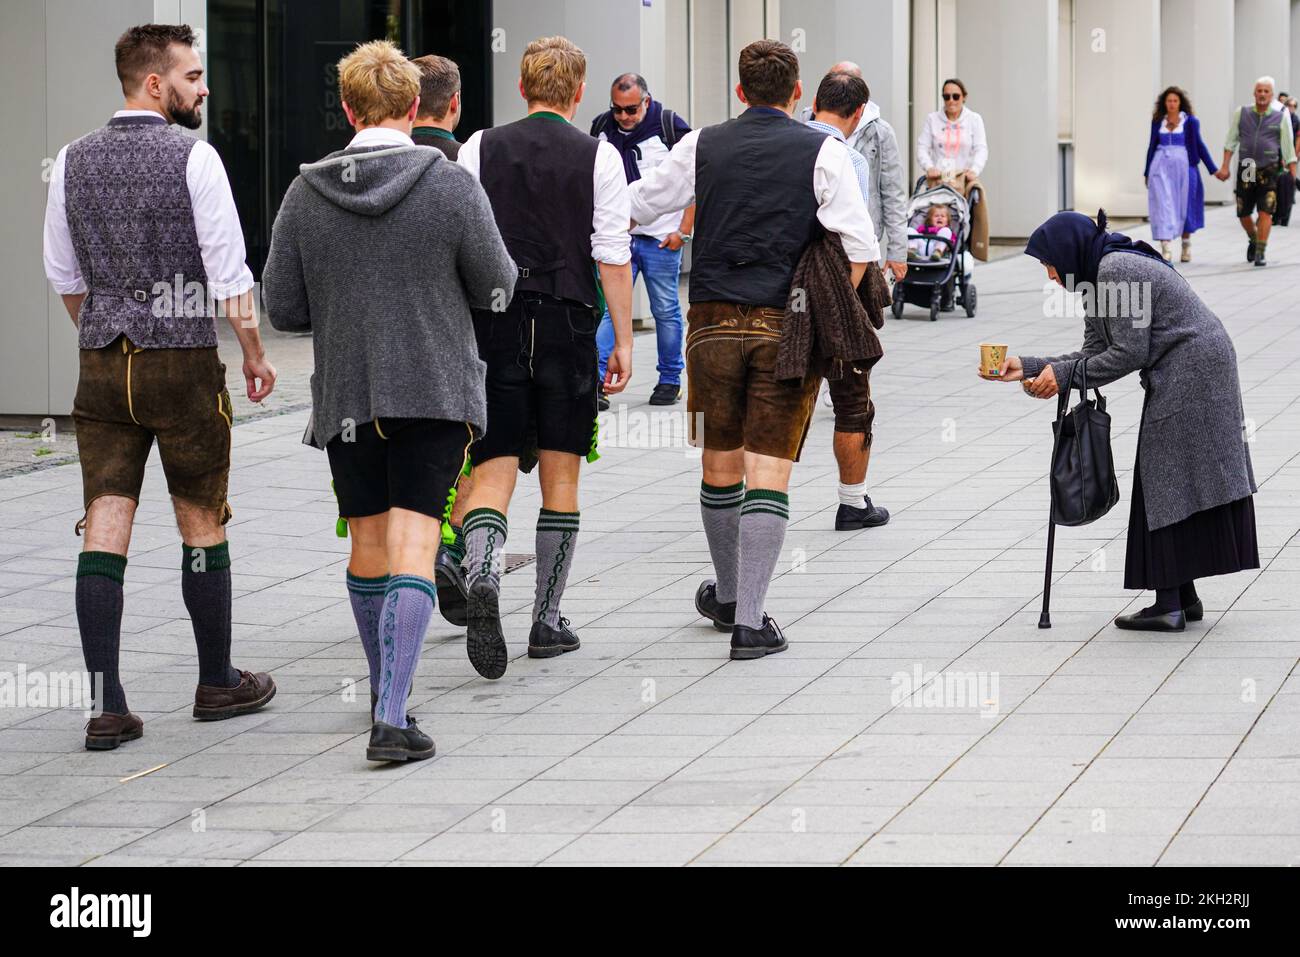 Young lads in Bavarian dress on their way to the Oktoberfest pass a beggar woman asking for money. Stock Photo